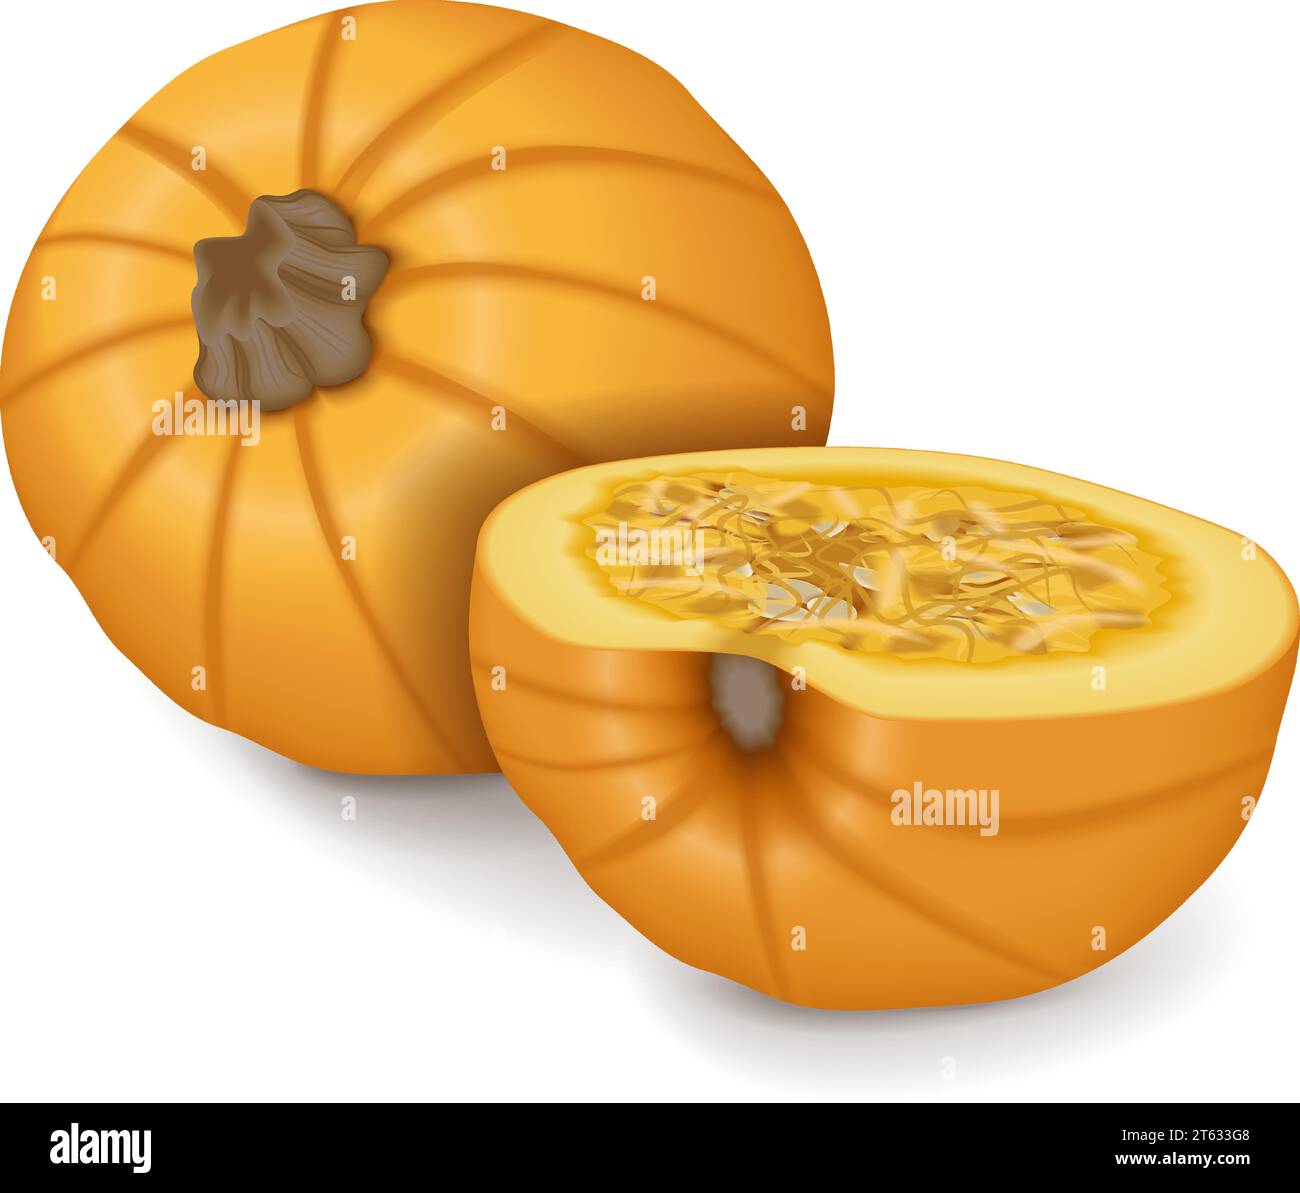 Whole and chopped Sugar Pie Pumpkins. Winter squash. Cucurbita pepo. Fruits and vegetables. Isolated vector illustration. Stock Vector